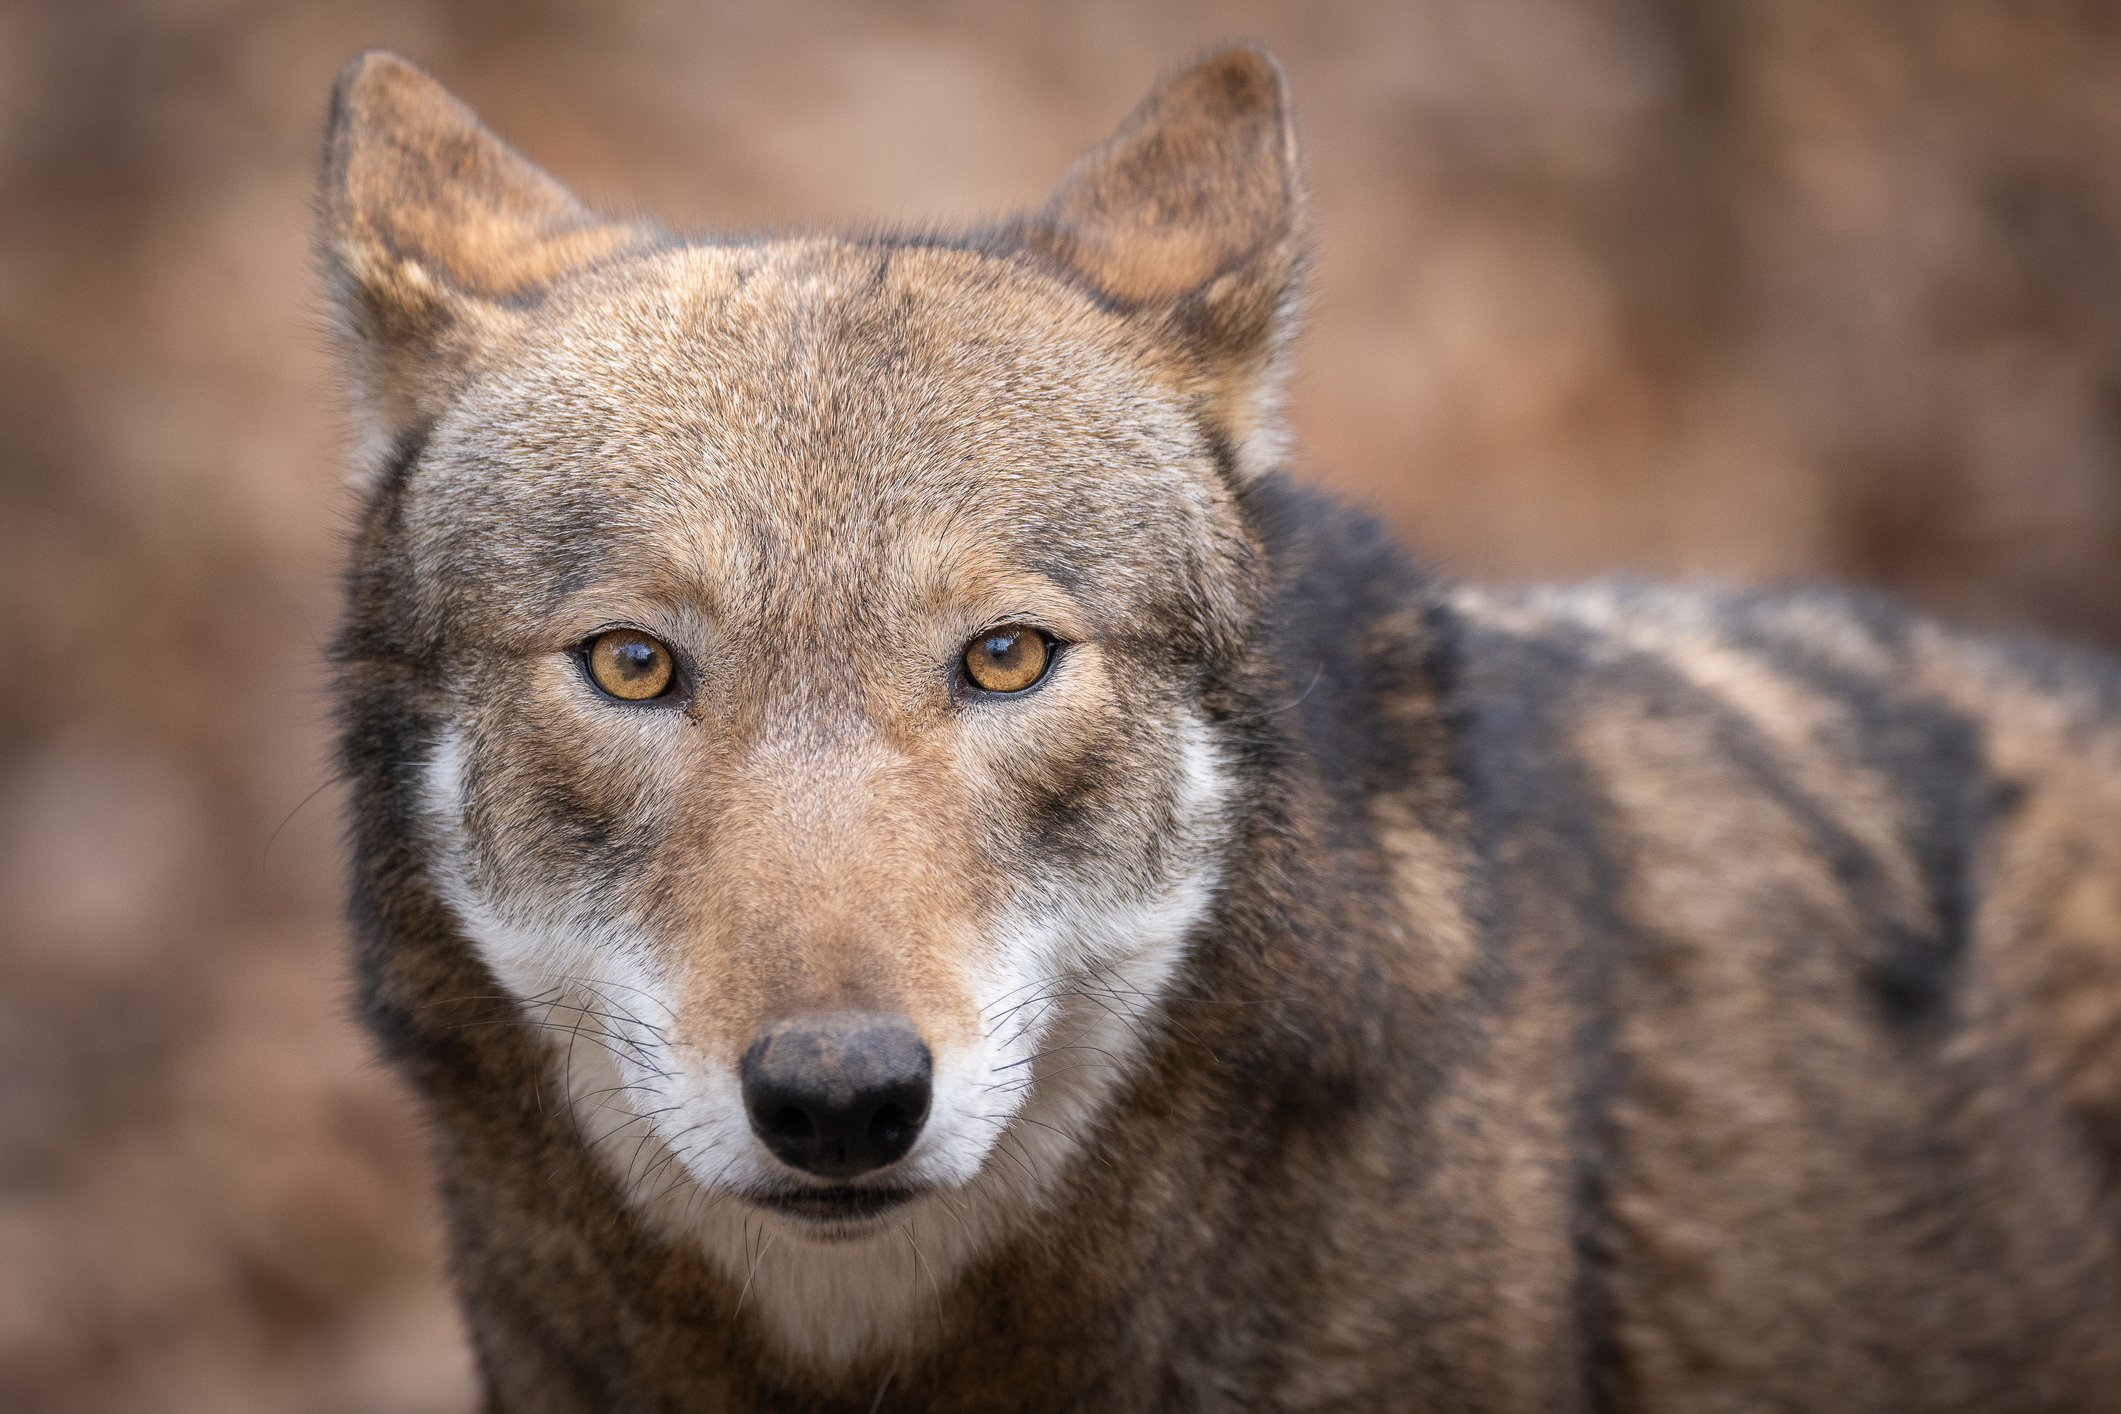 Rare footage of the world’s only wild red wolves captured in North Carolina